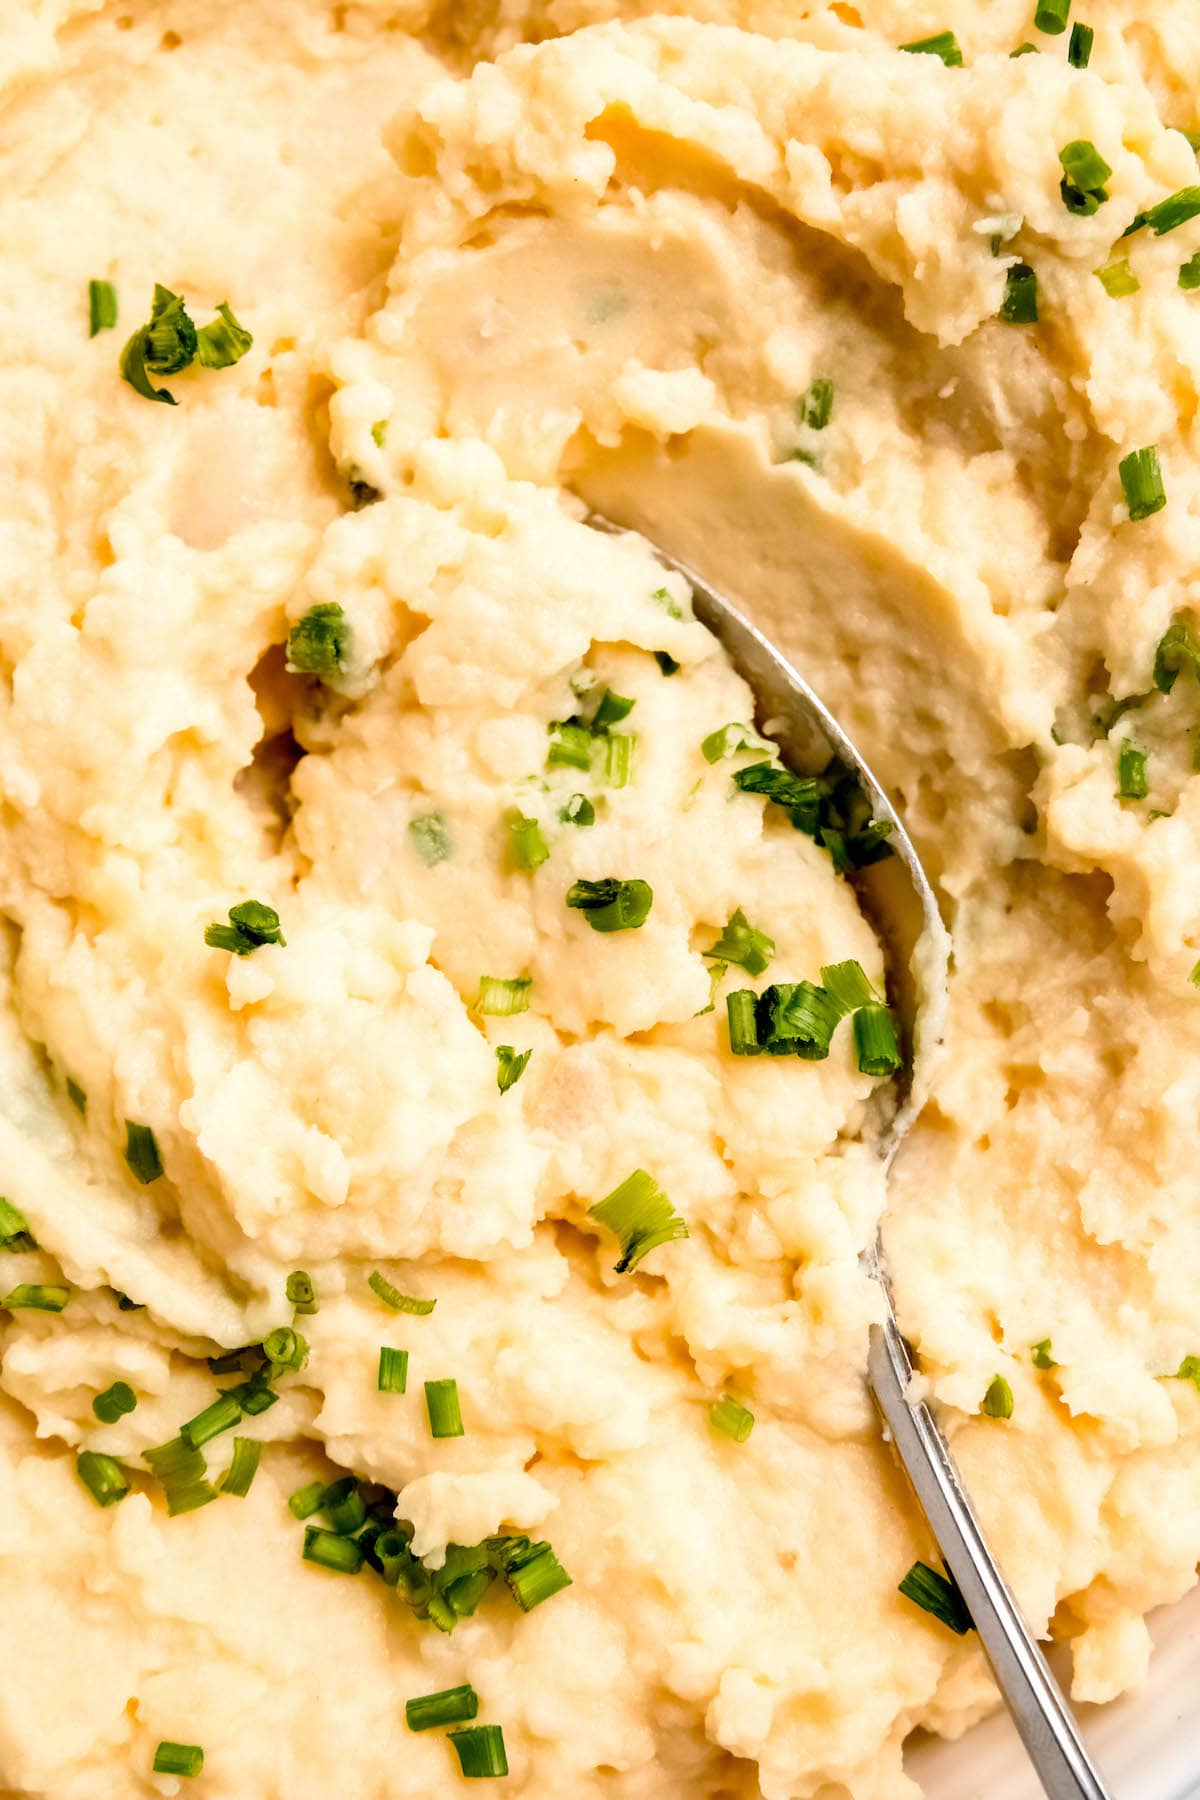 serving spoon scooping out a creamy pile of greek yogurt mashed potatoes that taste like sour cream and chive mashed potatoes, but healthier.